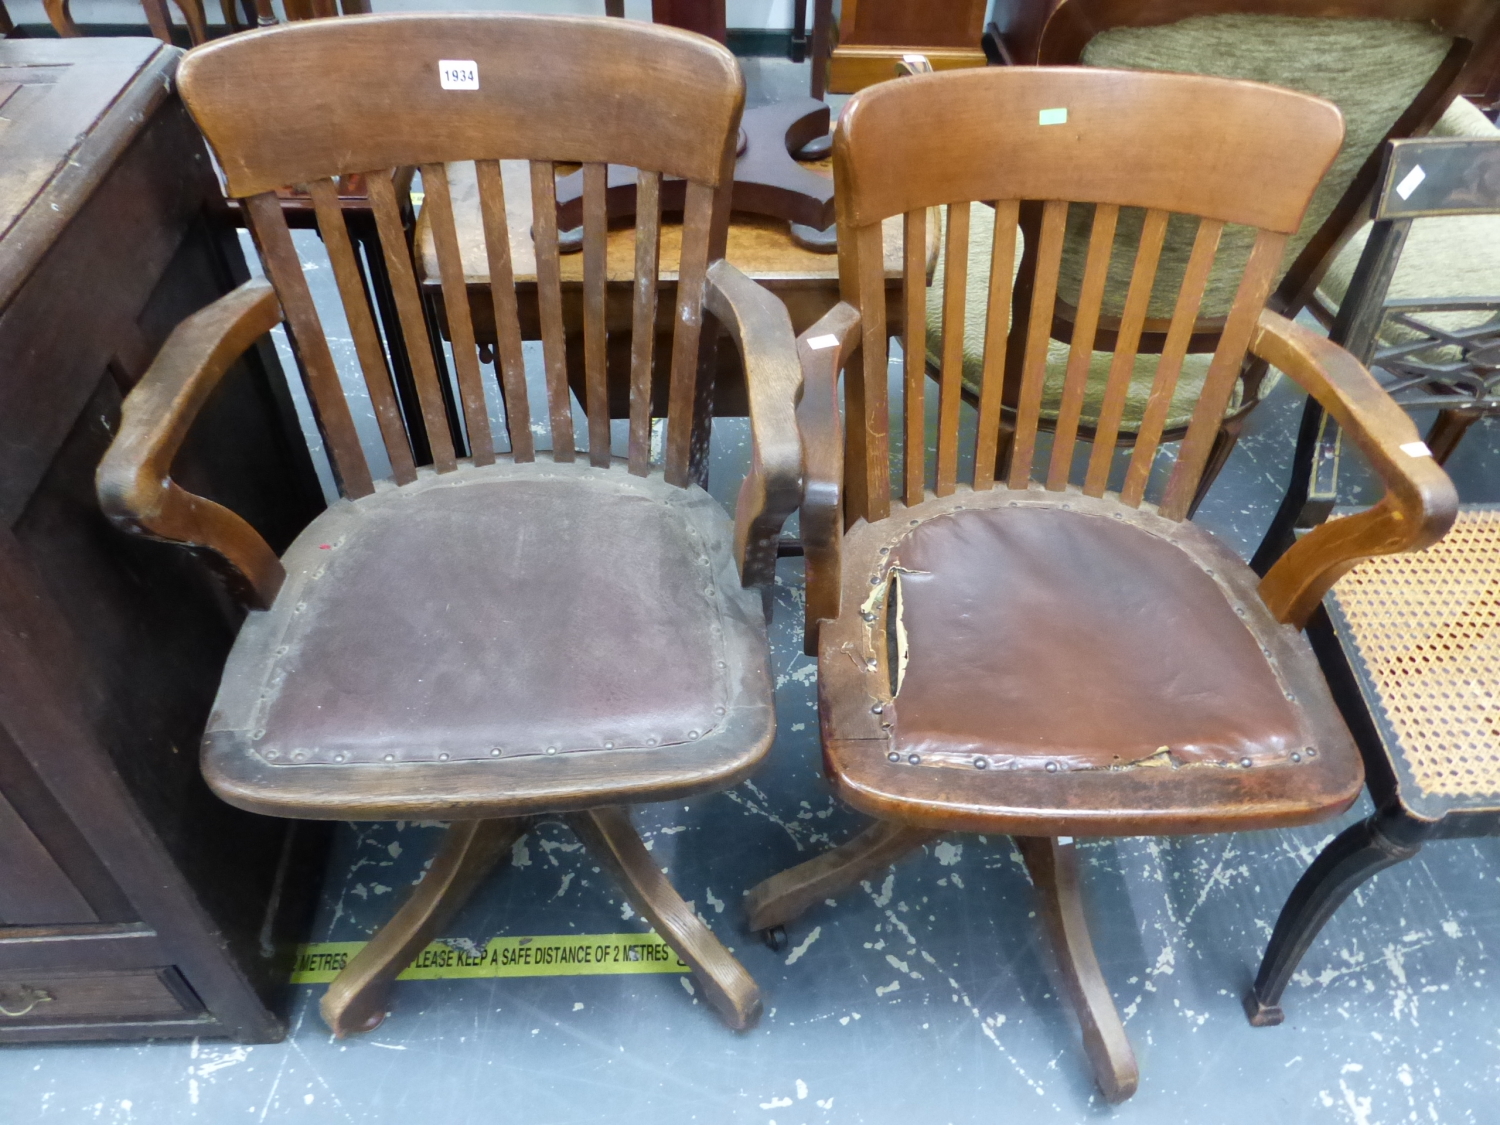 TWO VINTAGE OAK OFFICE ELBOW CHAIRS EACH ROTATING ON FOUR LEGS AND WITH LEATHERETTE SEATS